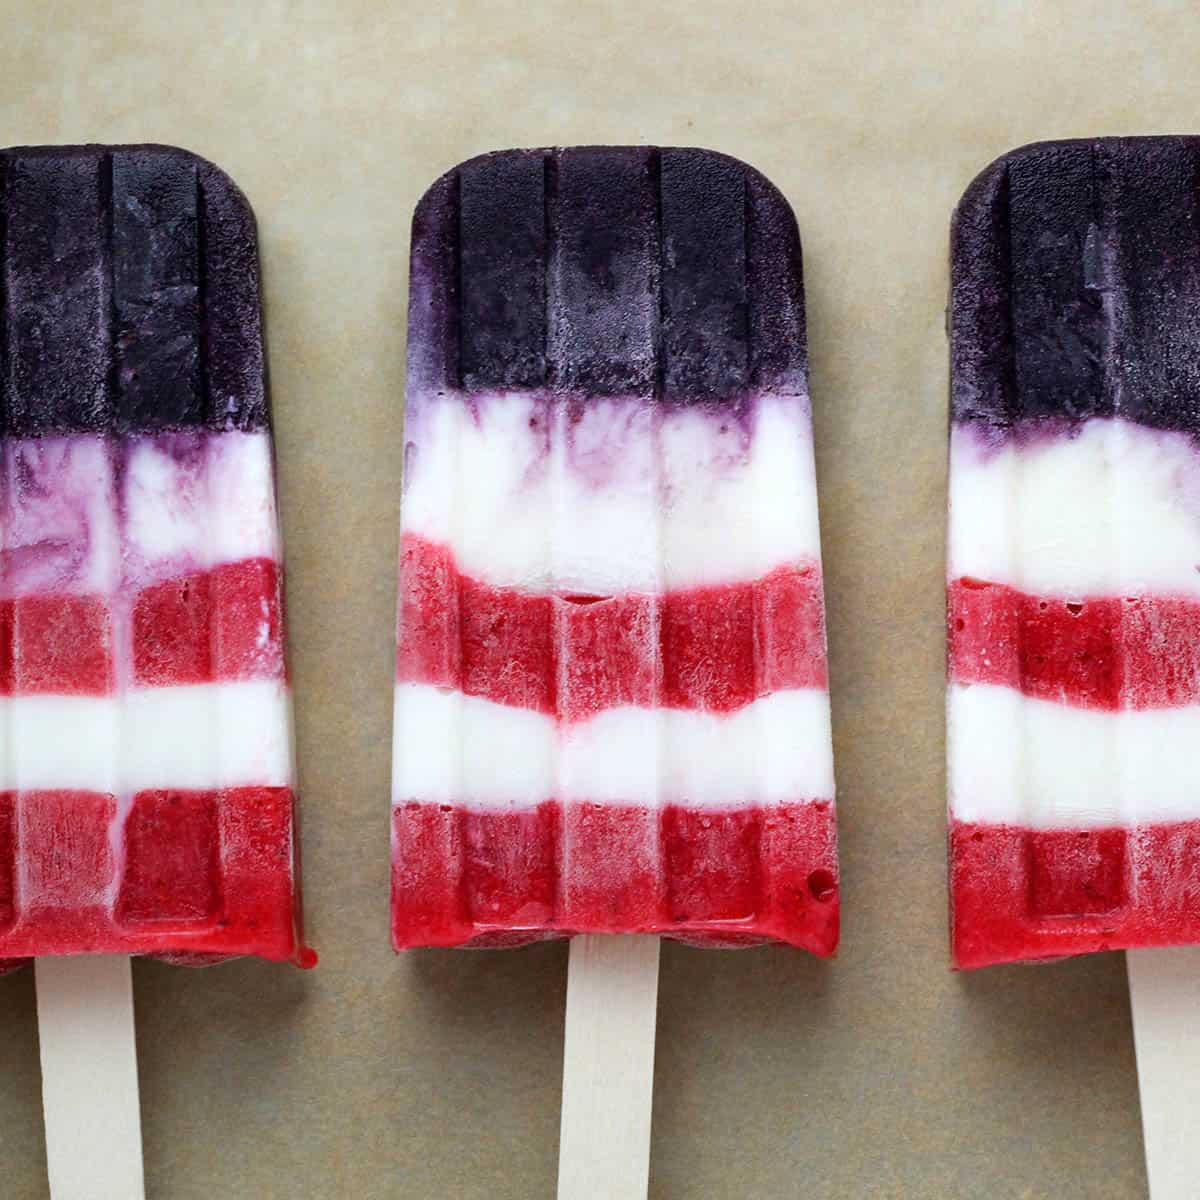 three layered popsicles with red, white, and blue layers